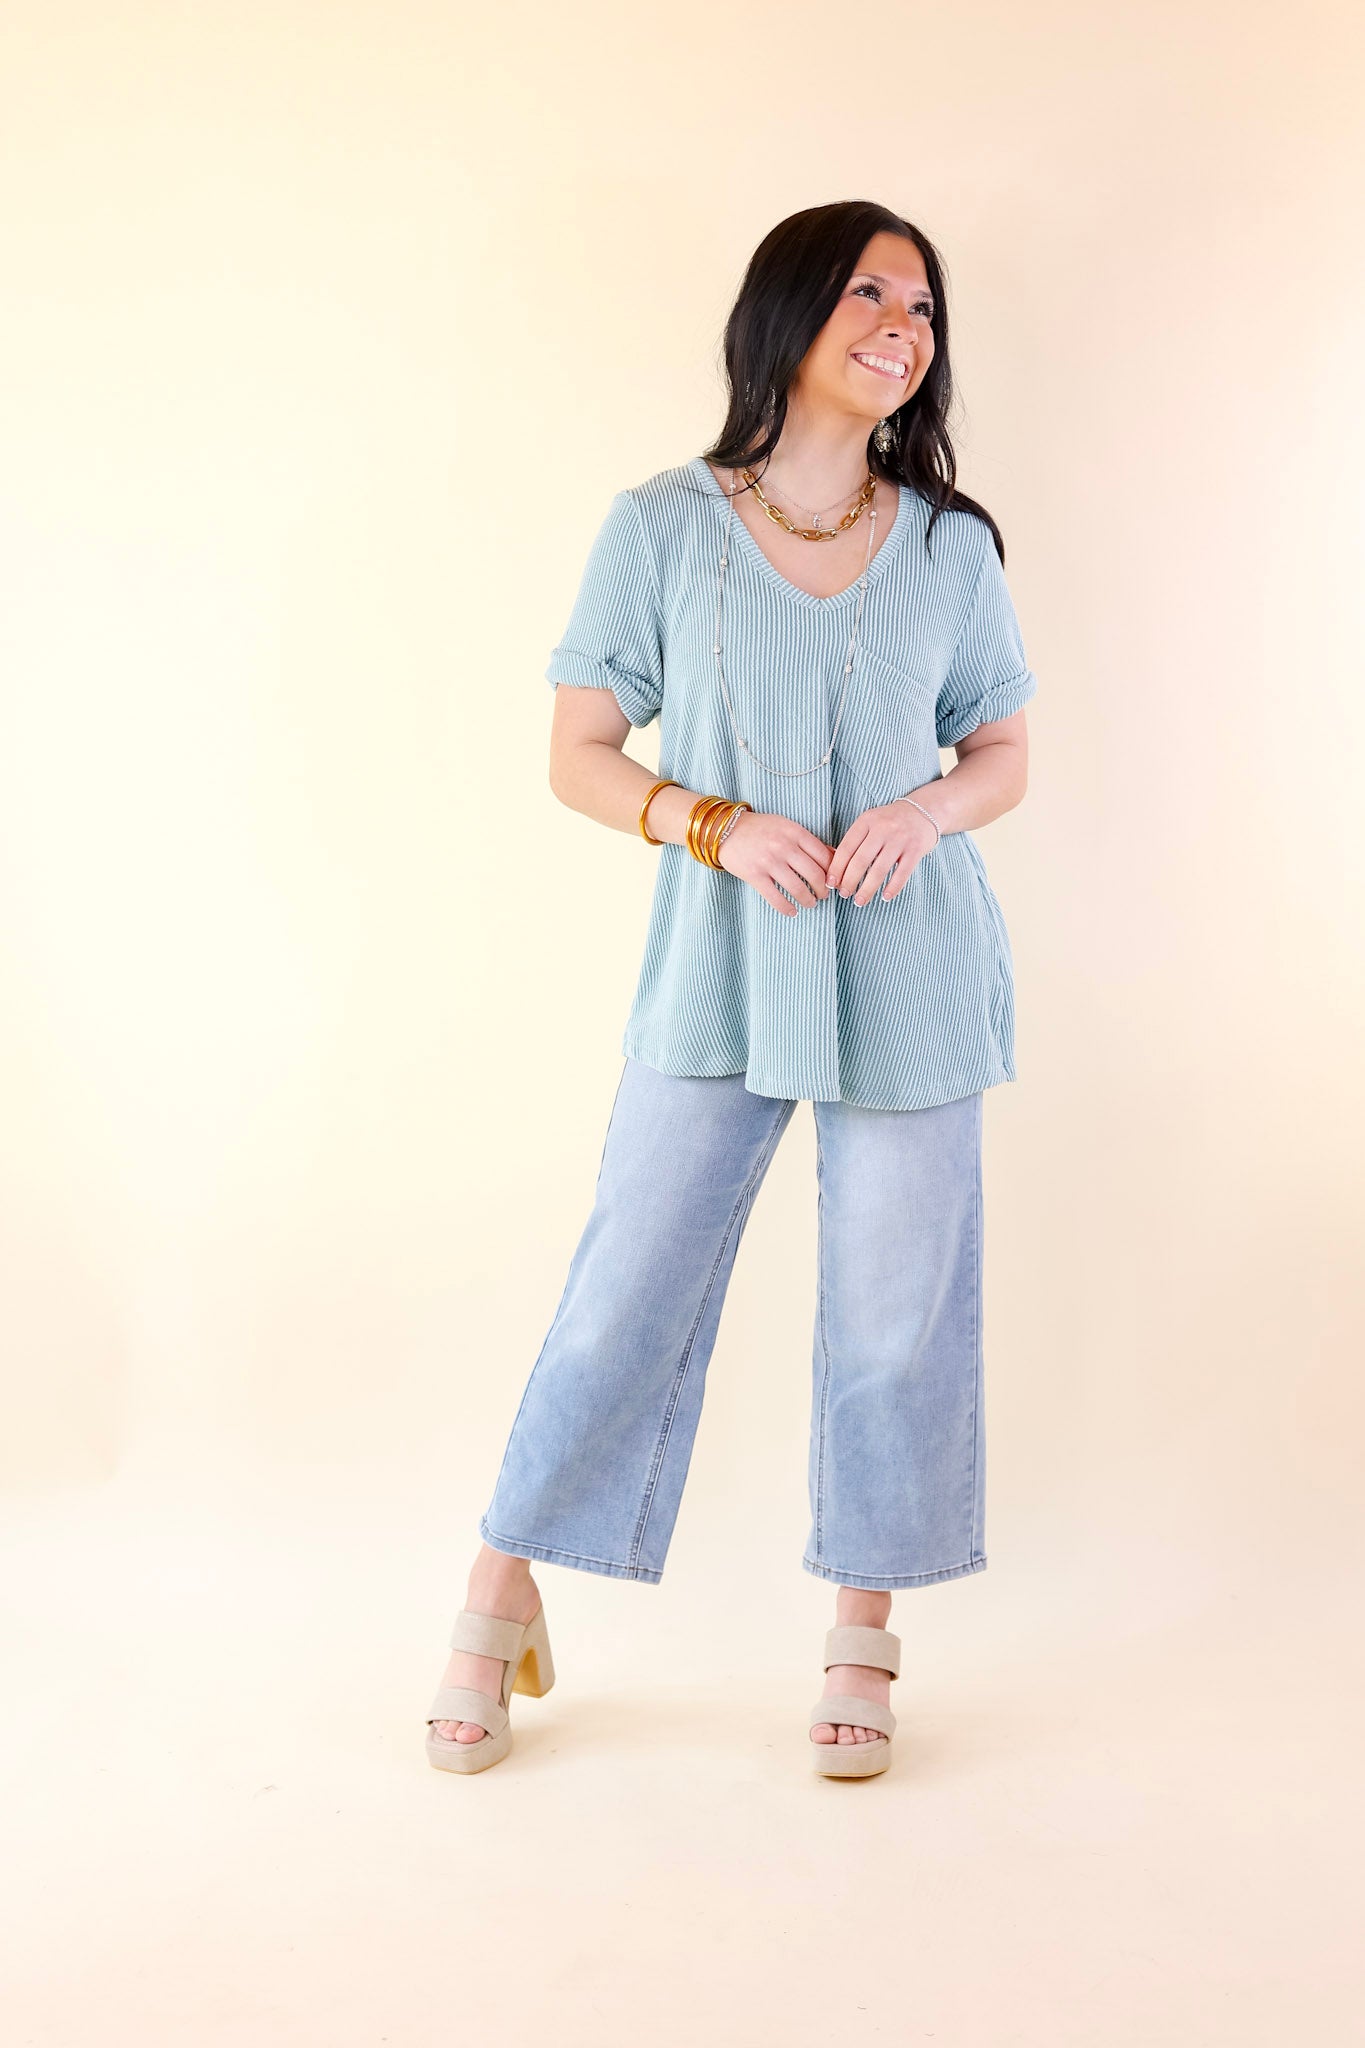 Only True Love Ribbed Short Sleeve Top with Front Pocket in Dusty Turquoise - Giddy Up Glamour Boutique